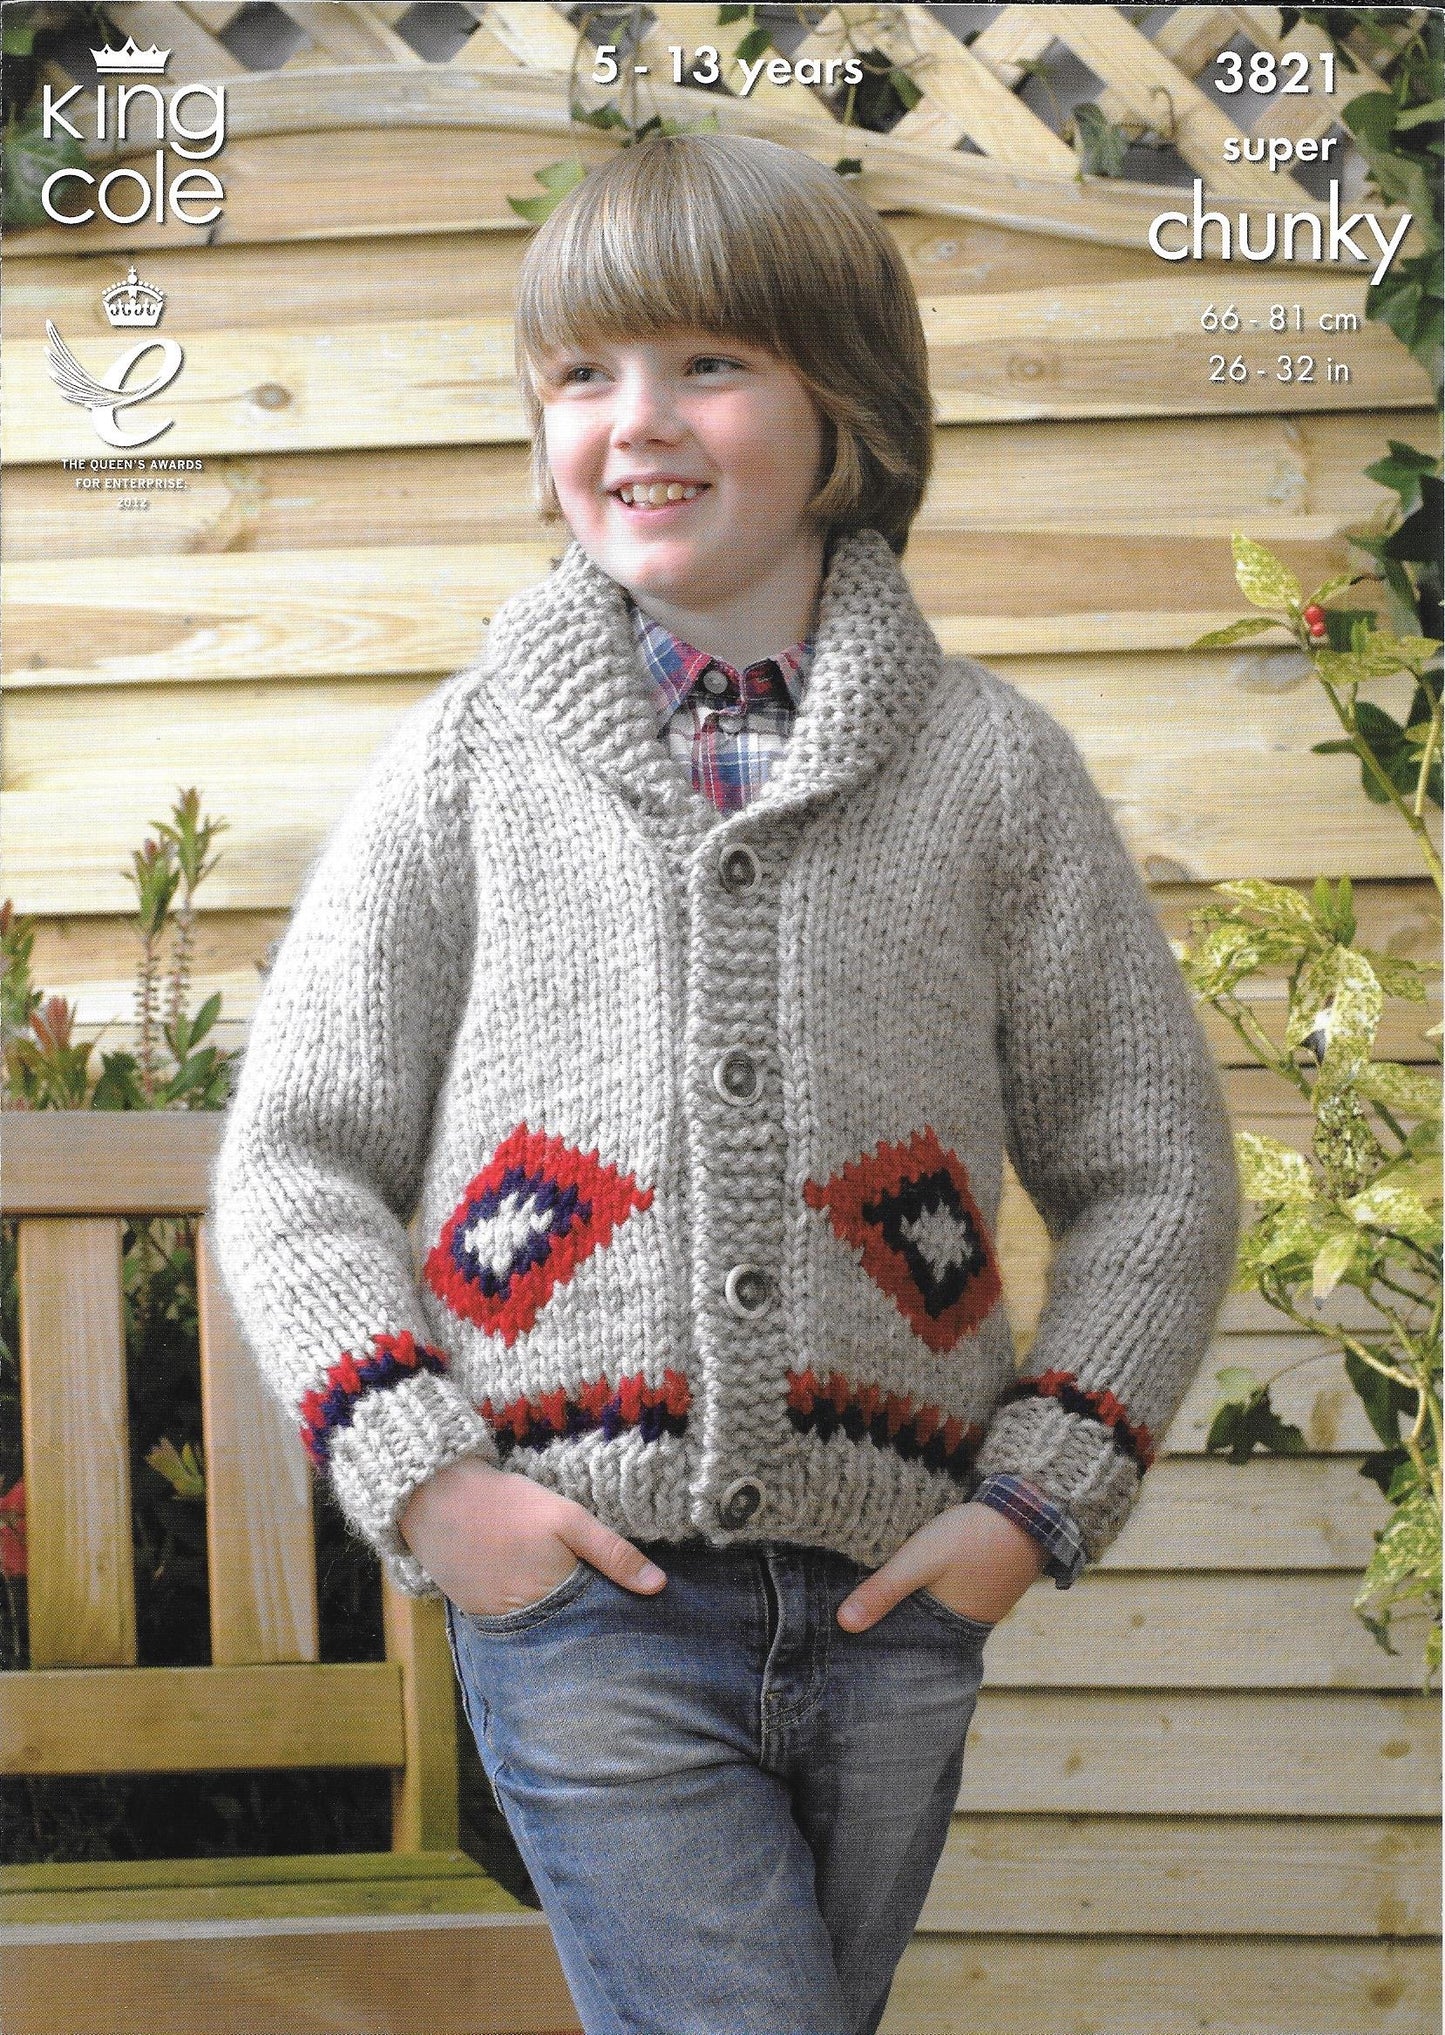 3821 King Cole Super Chunky collar cardigan and hoodie knitting pattern